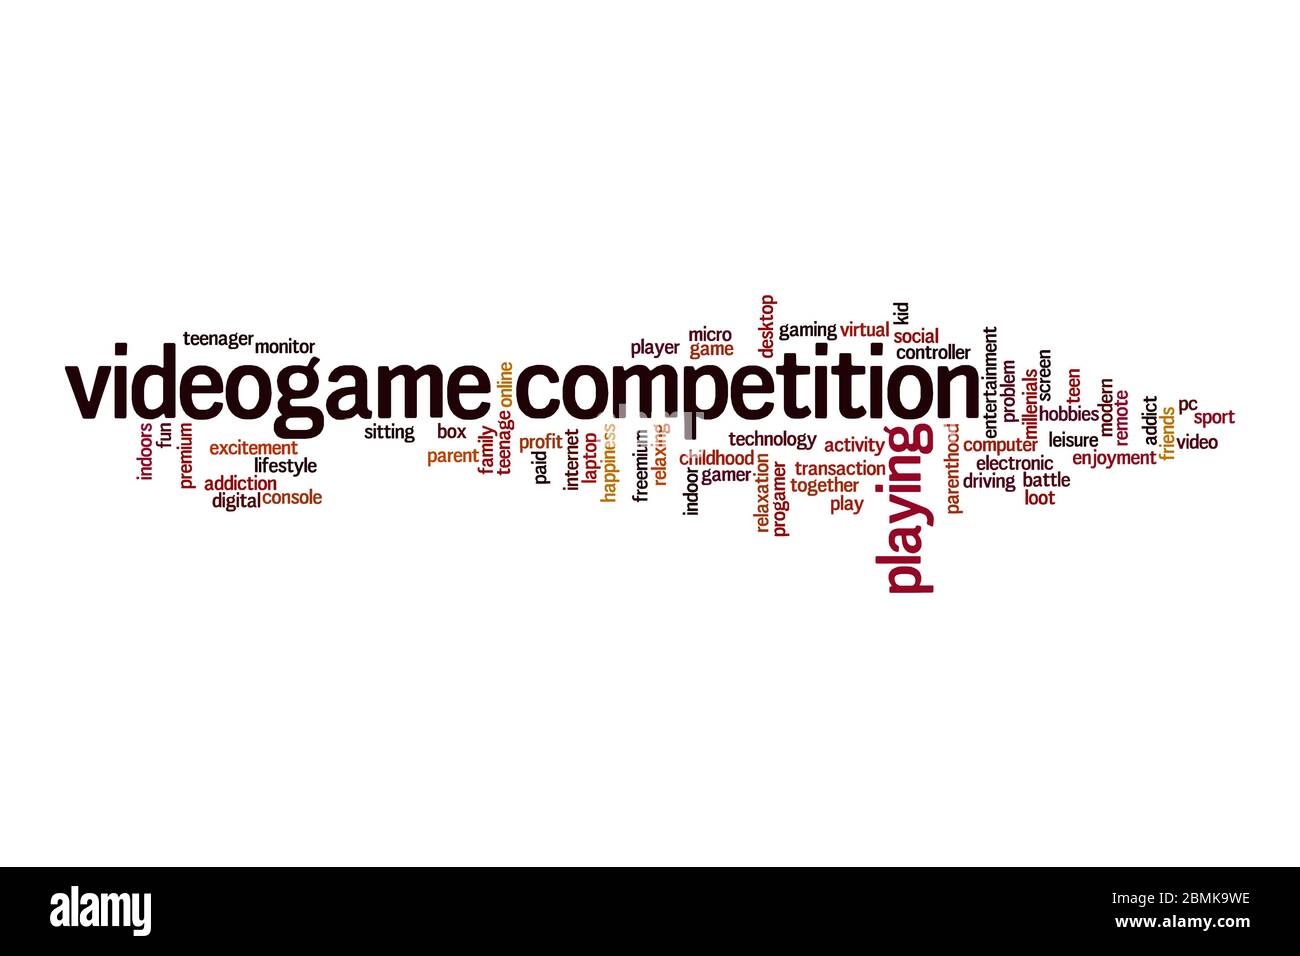 Videogame competition word cloud concept on white background Stock Photo